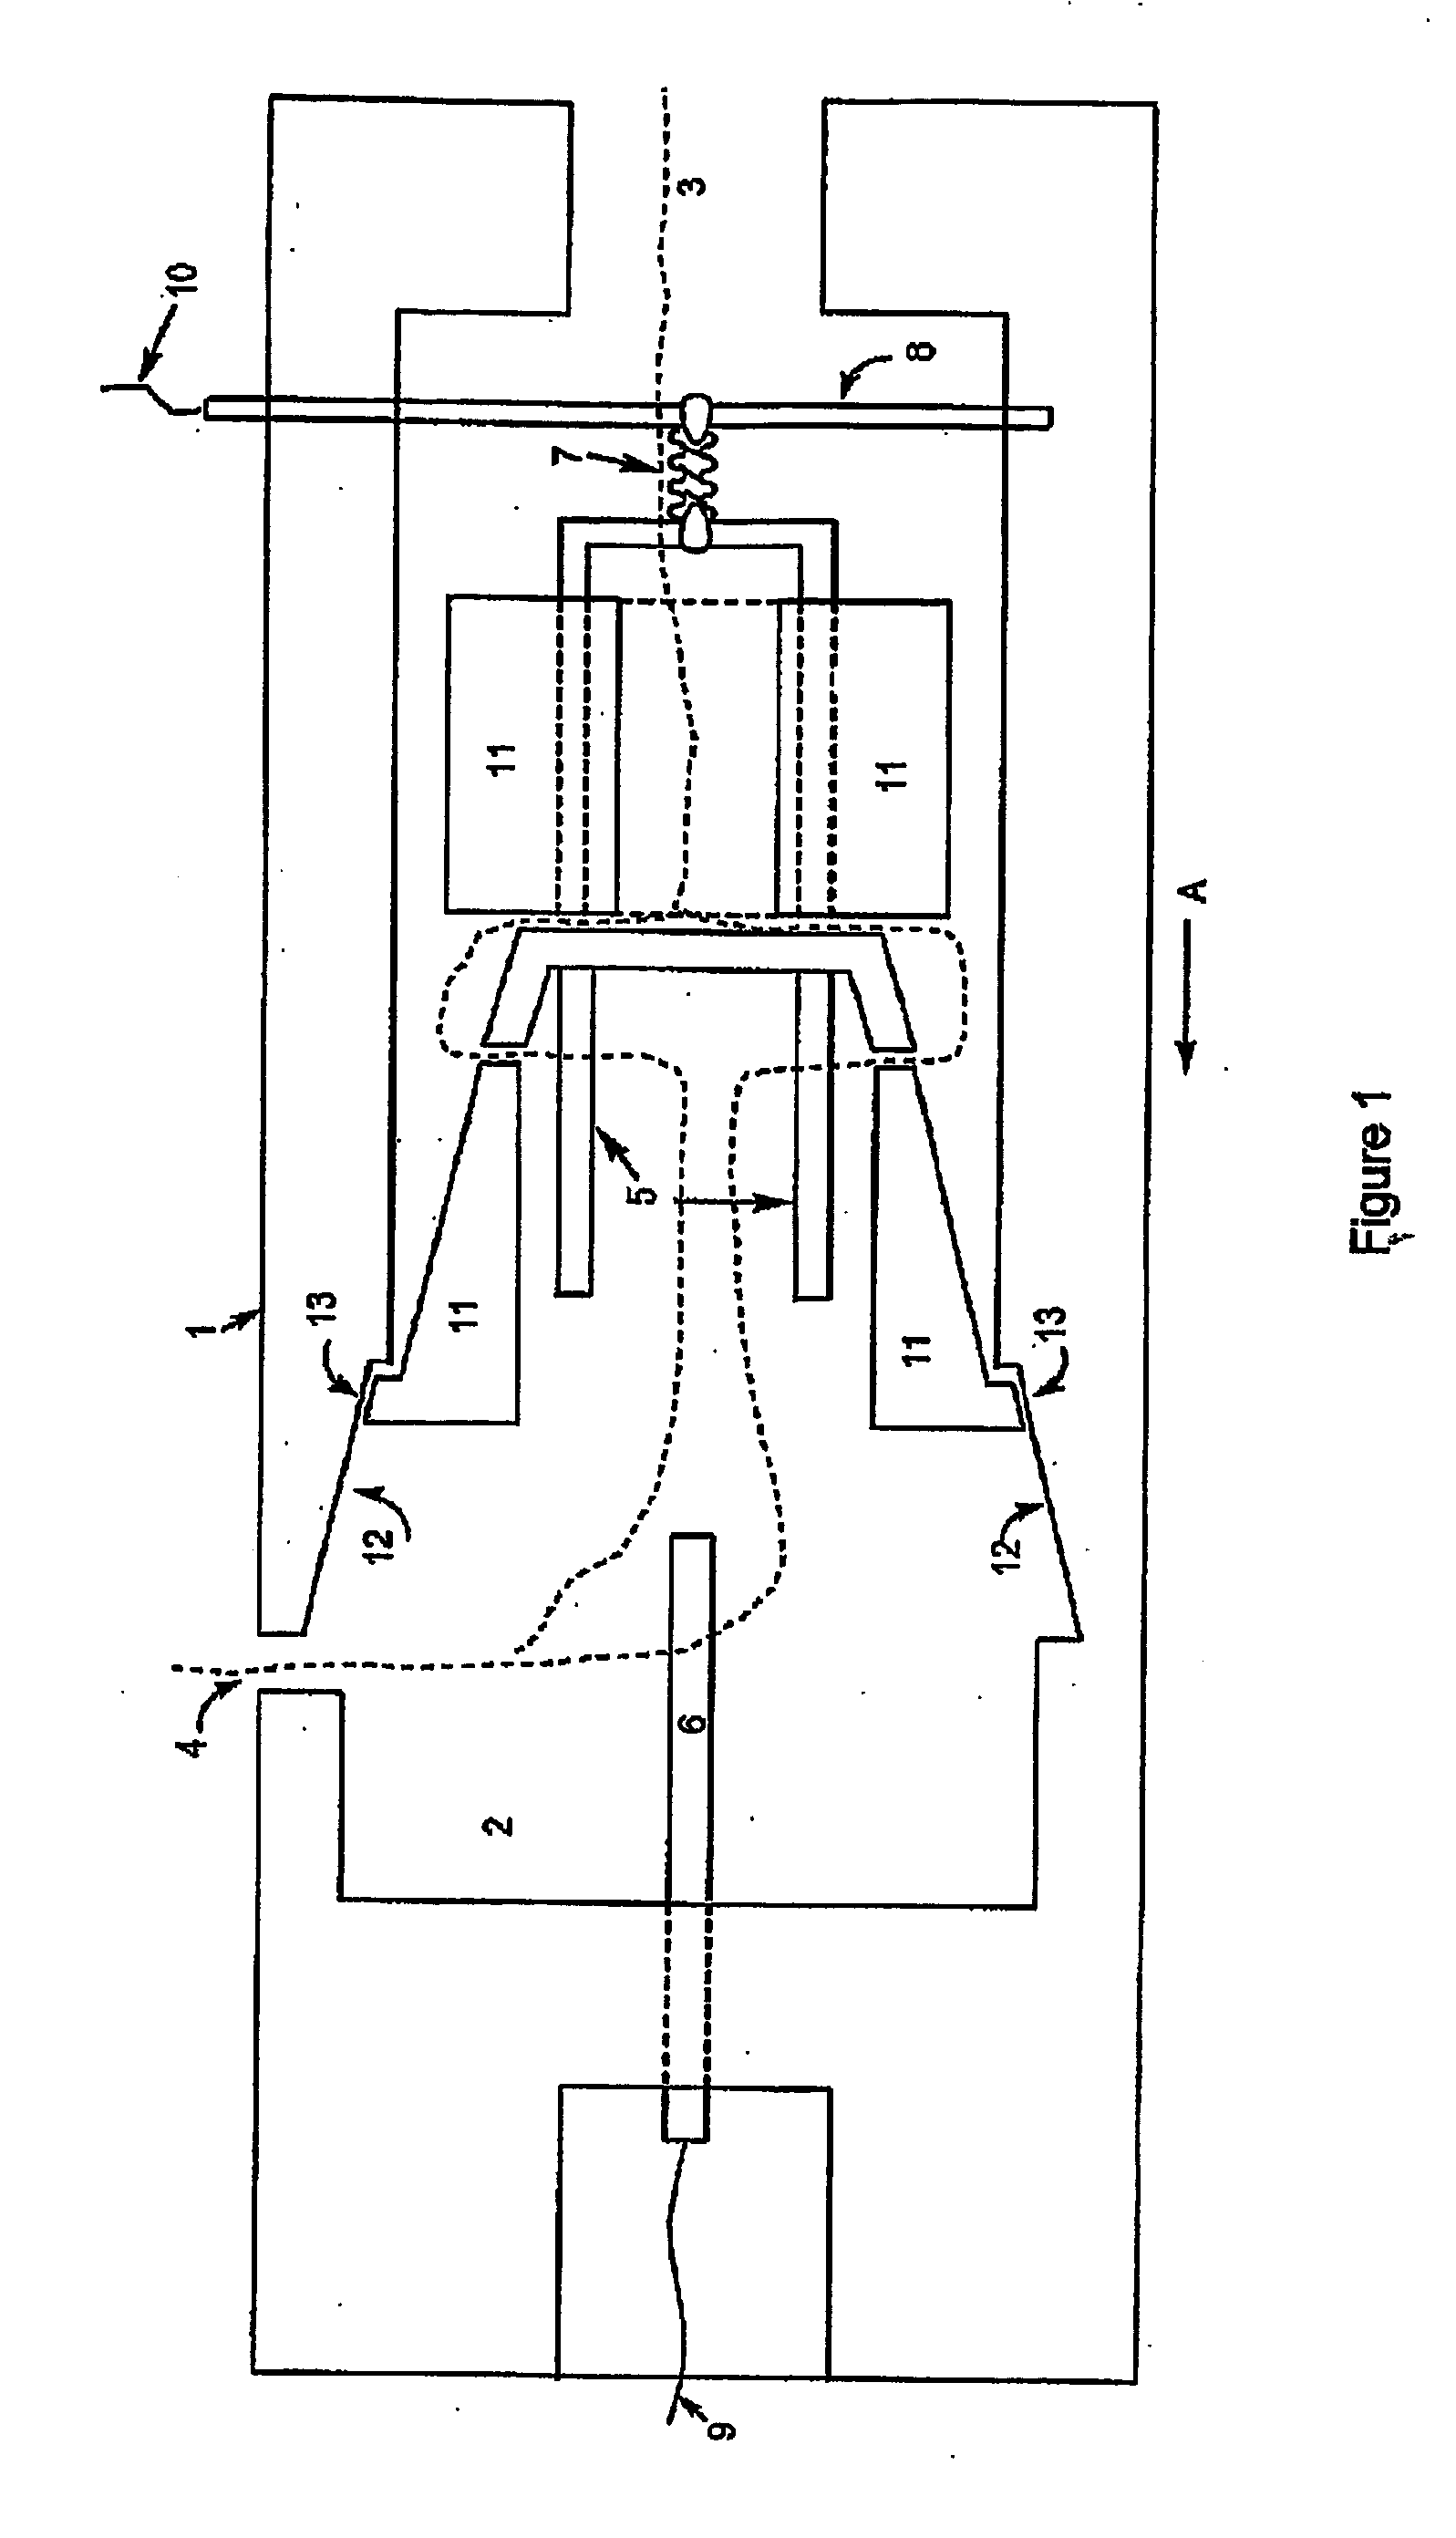 Method and apparatus for processing fluids